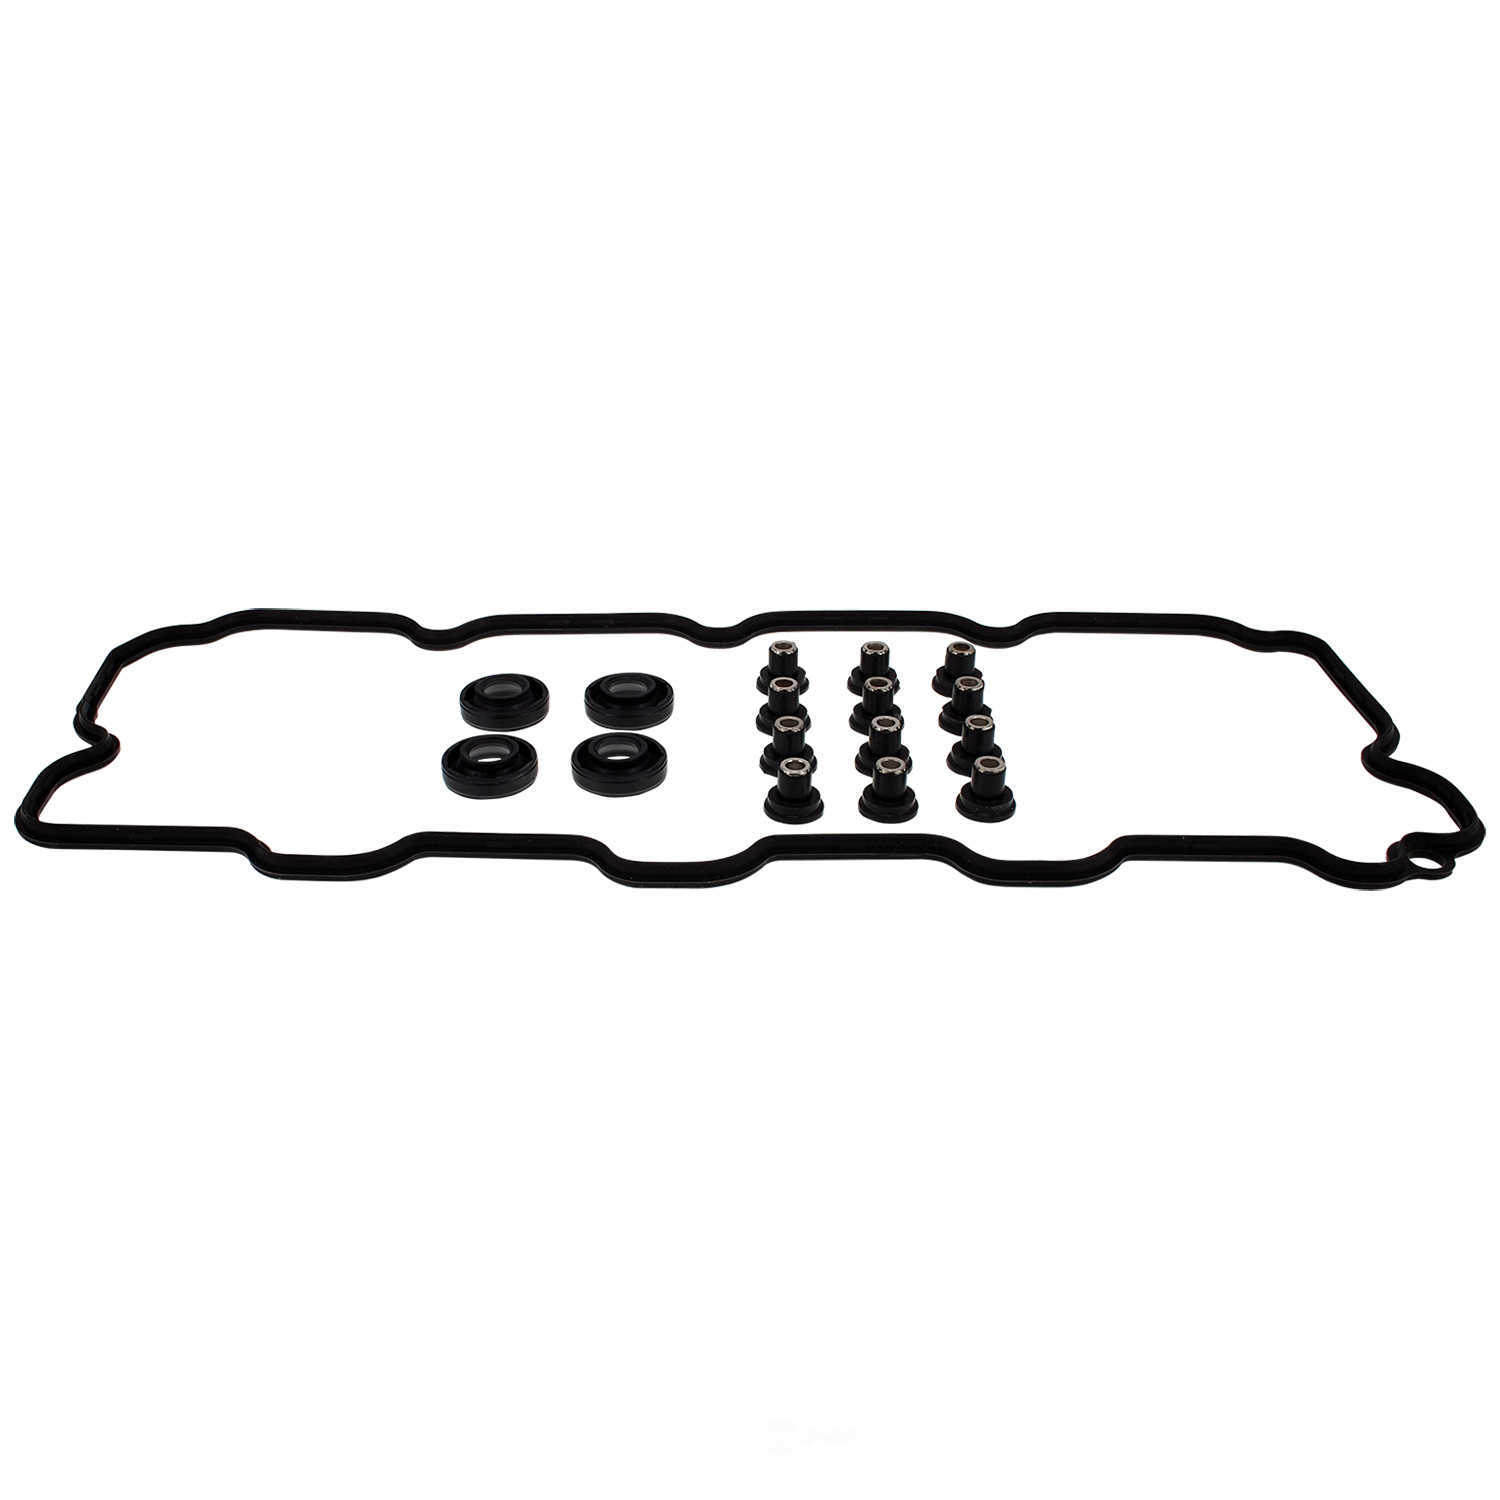 GB REMANUFACTURING INC. - Valve Cover Gasket Kit - GBR 522-035